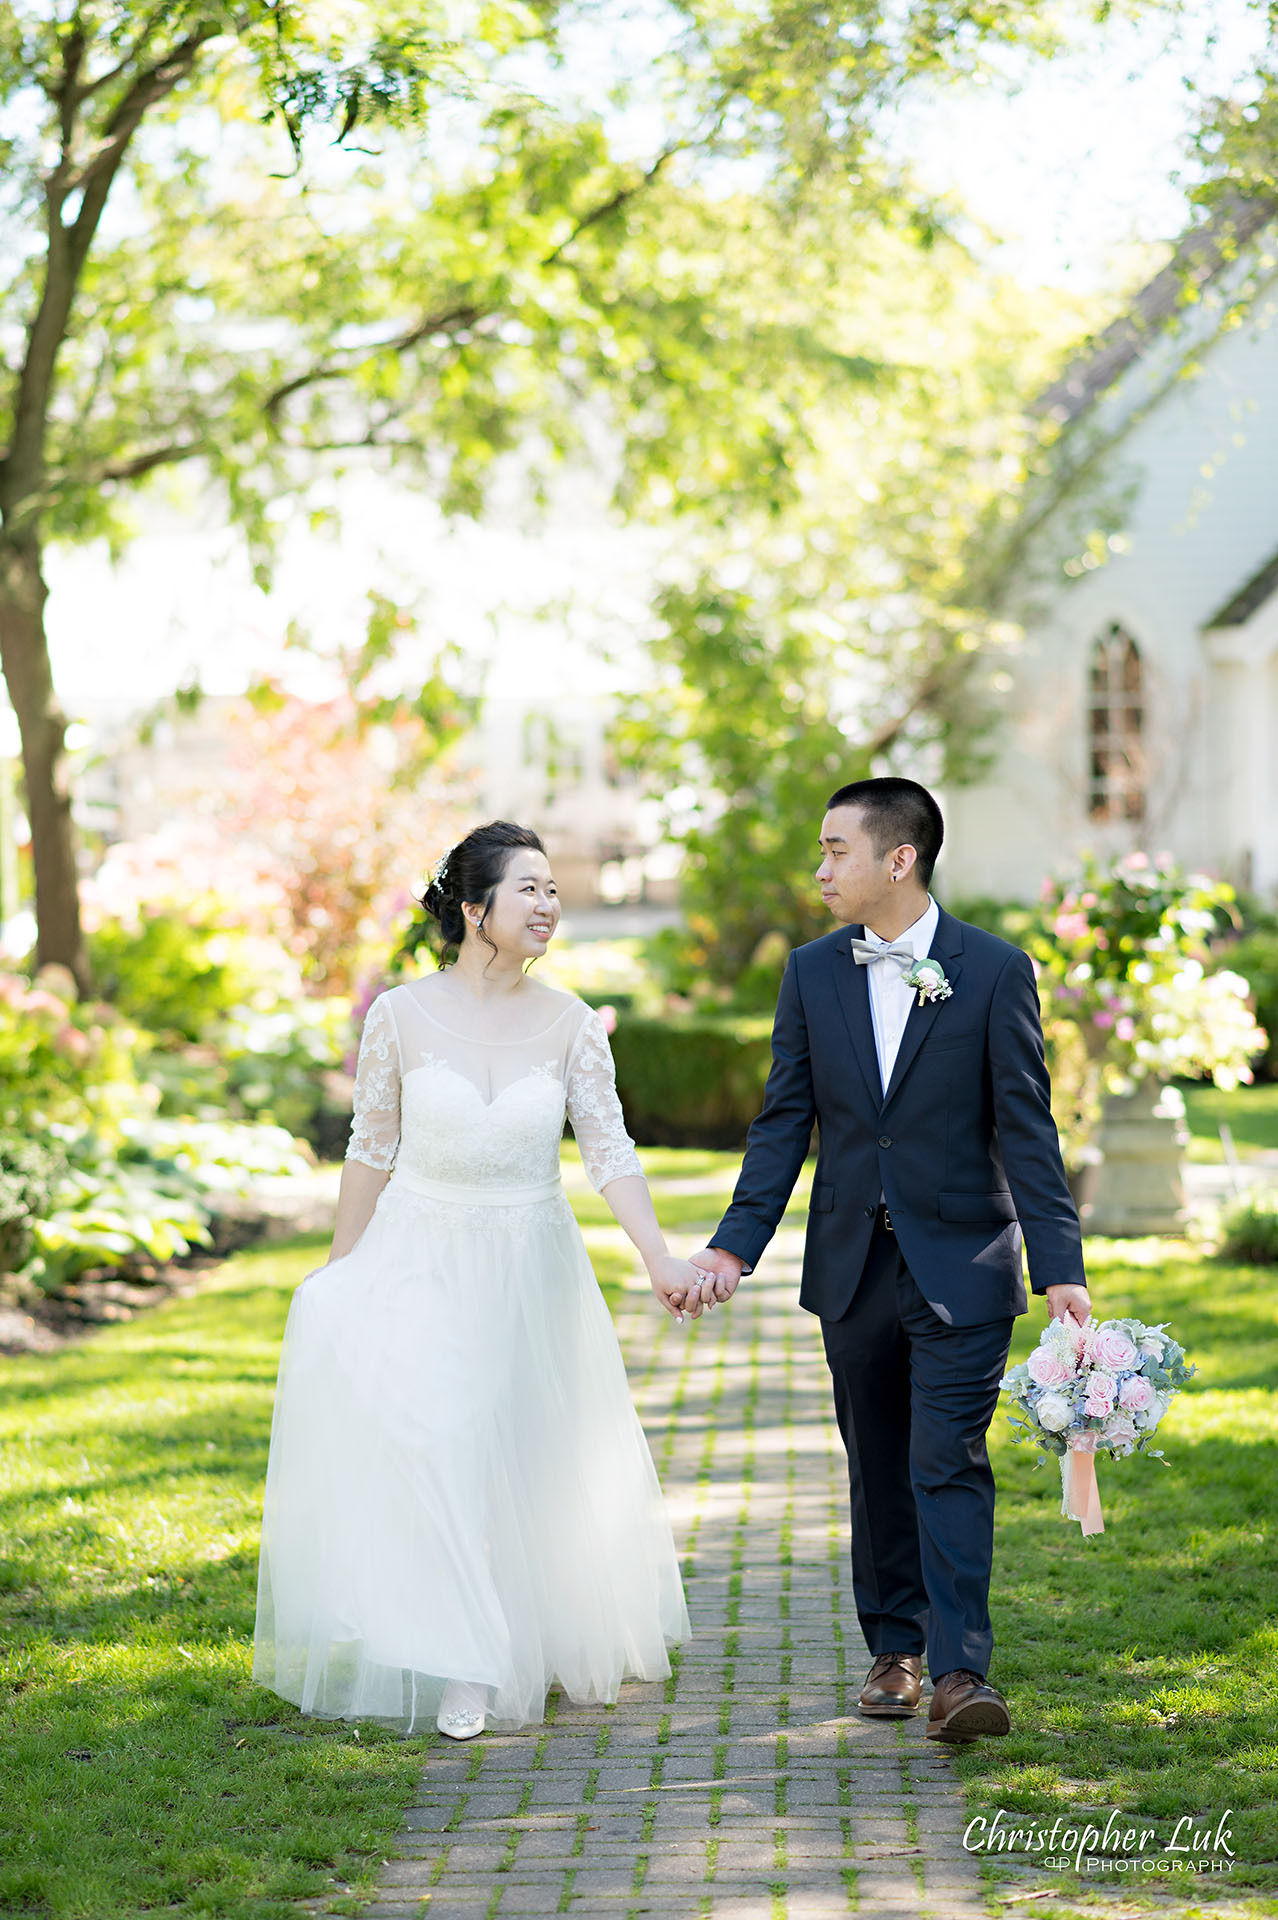 Christopher Luk Toronto Wedding Photographer The Doctor's House Chapel Kleinburg Natural Candid Photojournalistic Posed Bride Groom Holding Hands Together Walking Garden Micro Microwedding 